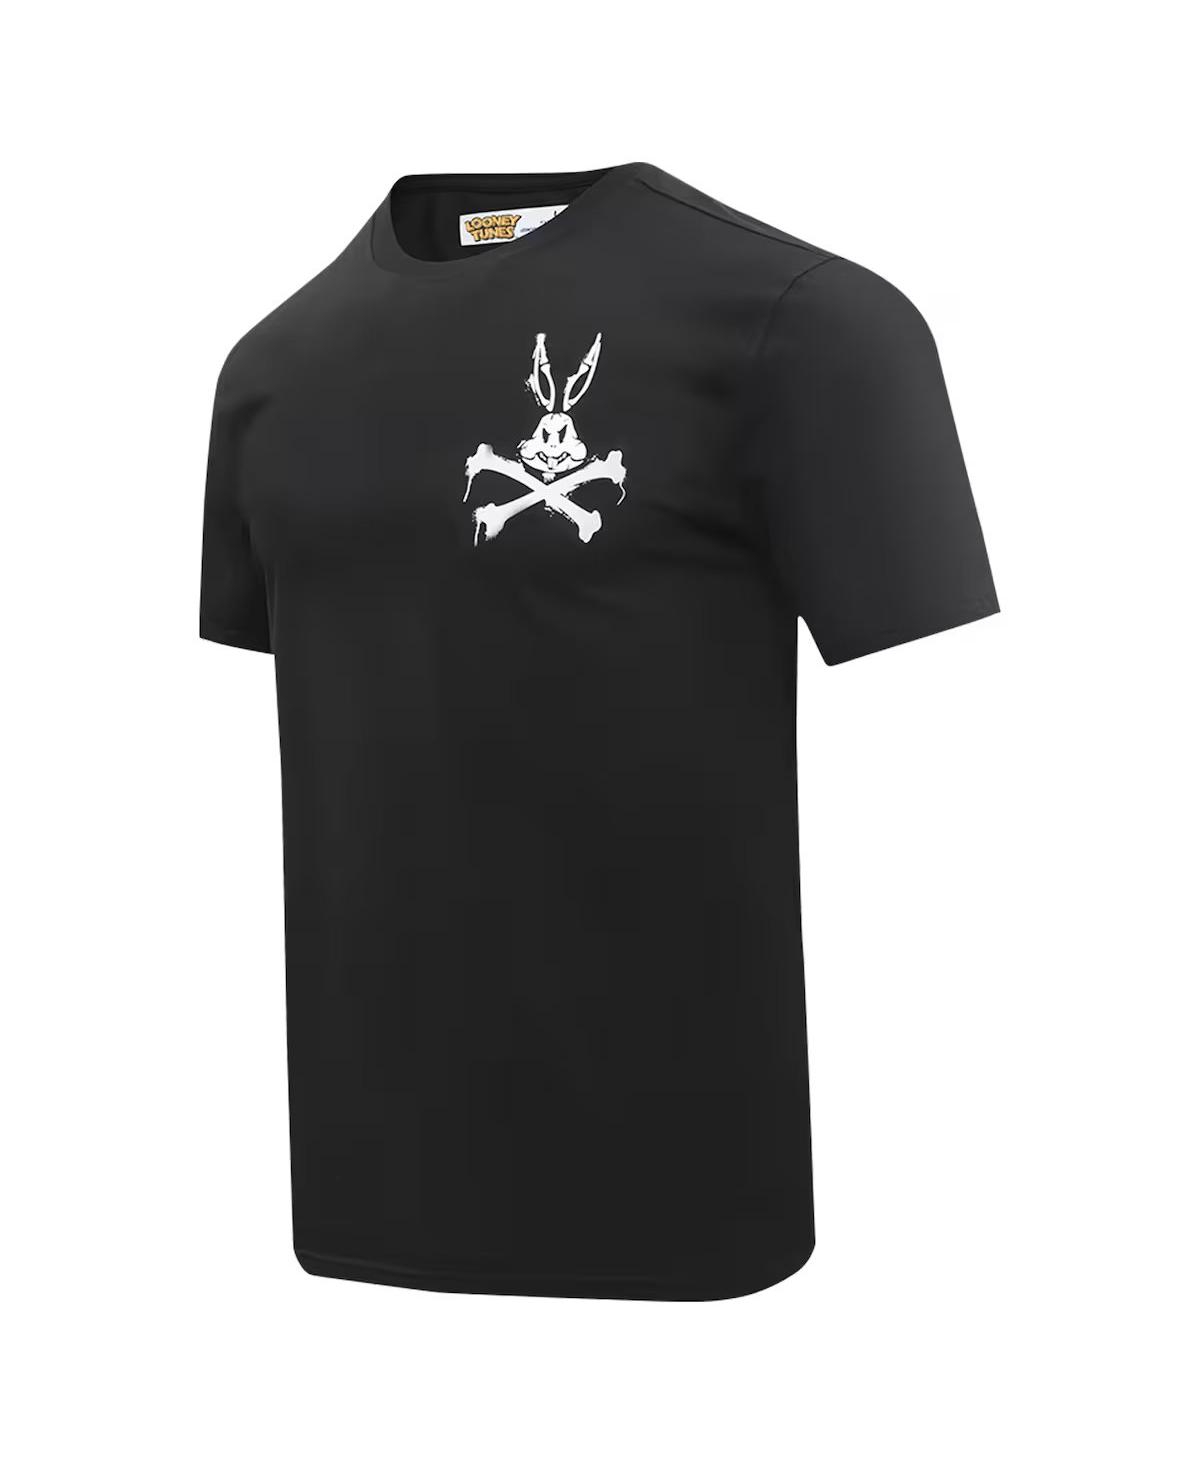 Shop Freeze Max Men's Bugs Bunny Black Looney Tunes Melted Skeleton T-shirt